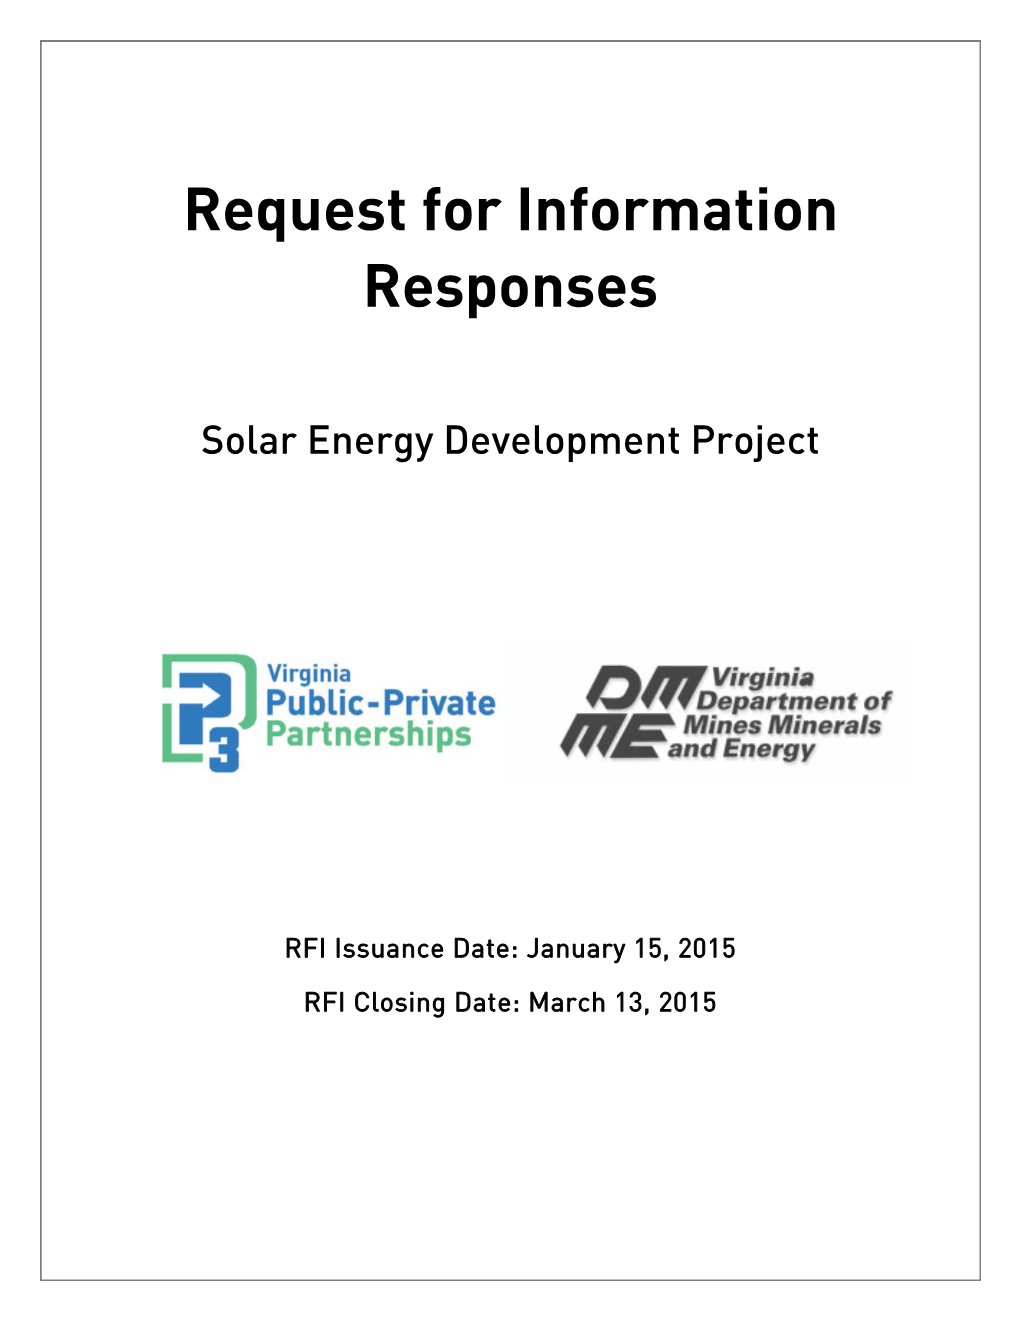 Request for Information Responses